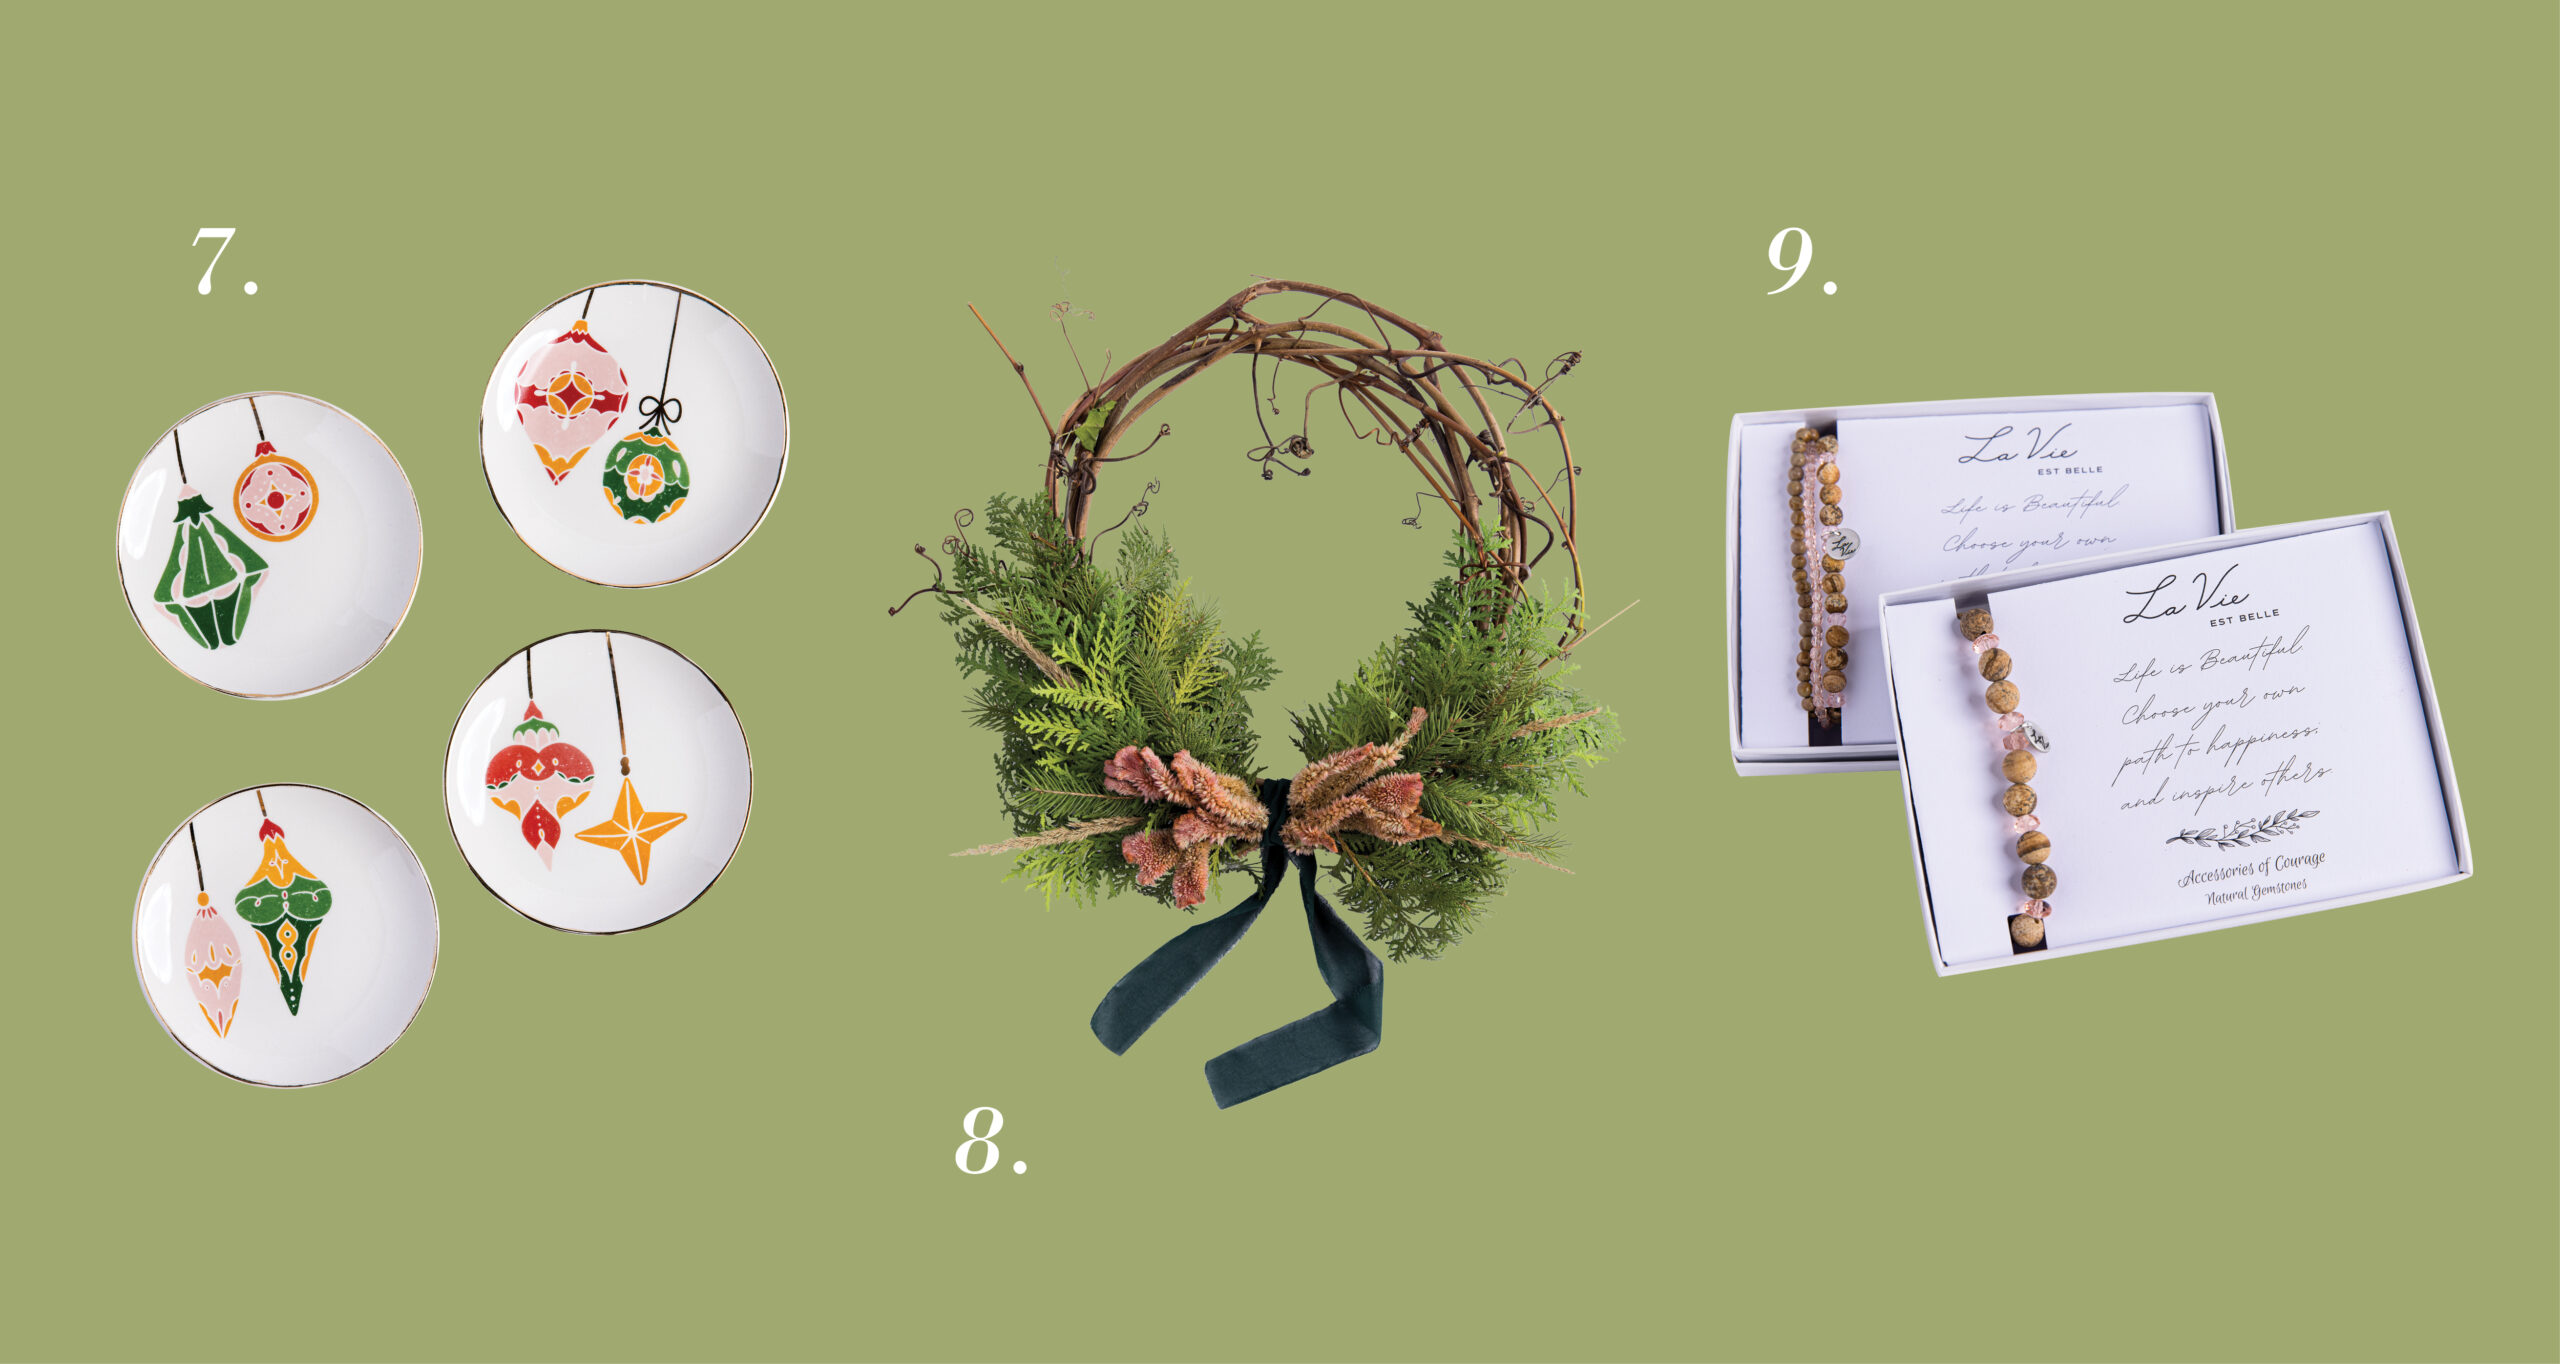 7. 5” Round Stoneware Plate with Ornaments and Gold Electroplating, La Vie Est Belle, $10/each 8. Holiday Wreath, Petal and Stick, $30–$45 9. Various Bracelets, Accessories of Courage and La Vie Est Belle, $34–$42